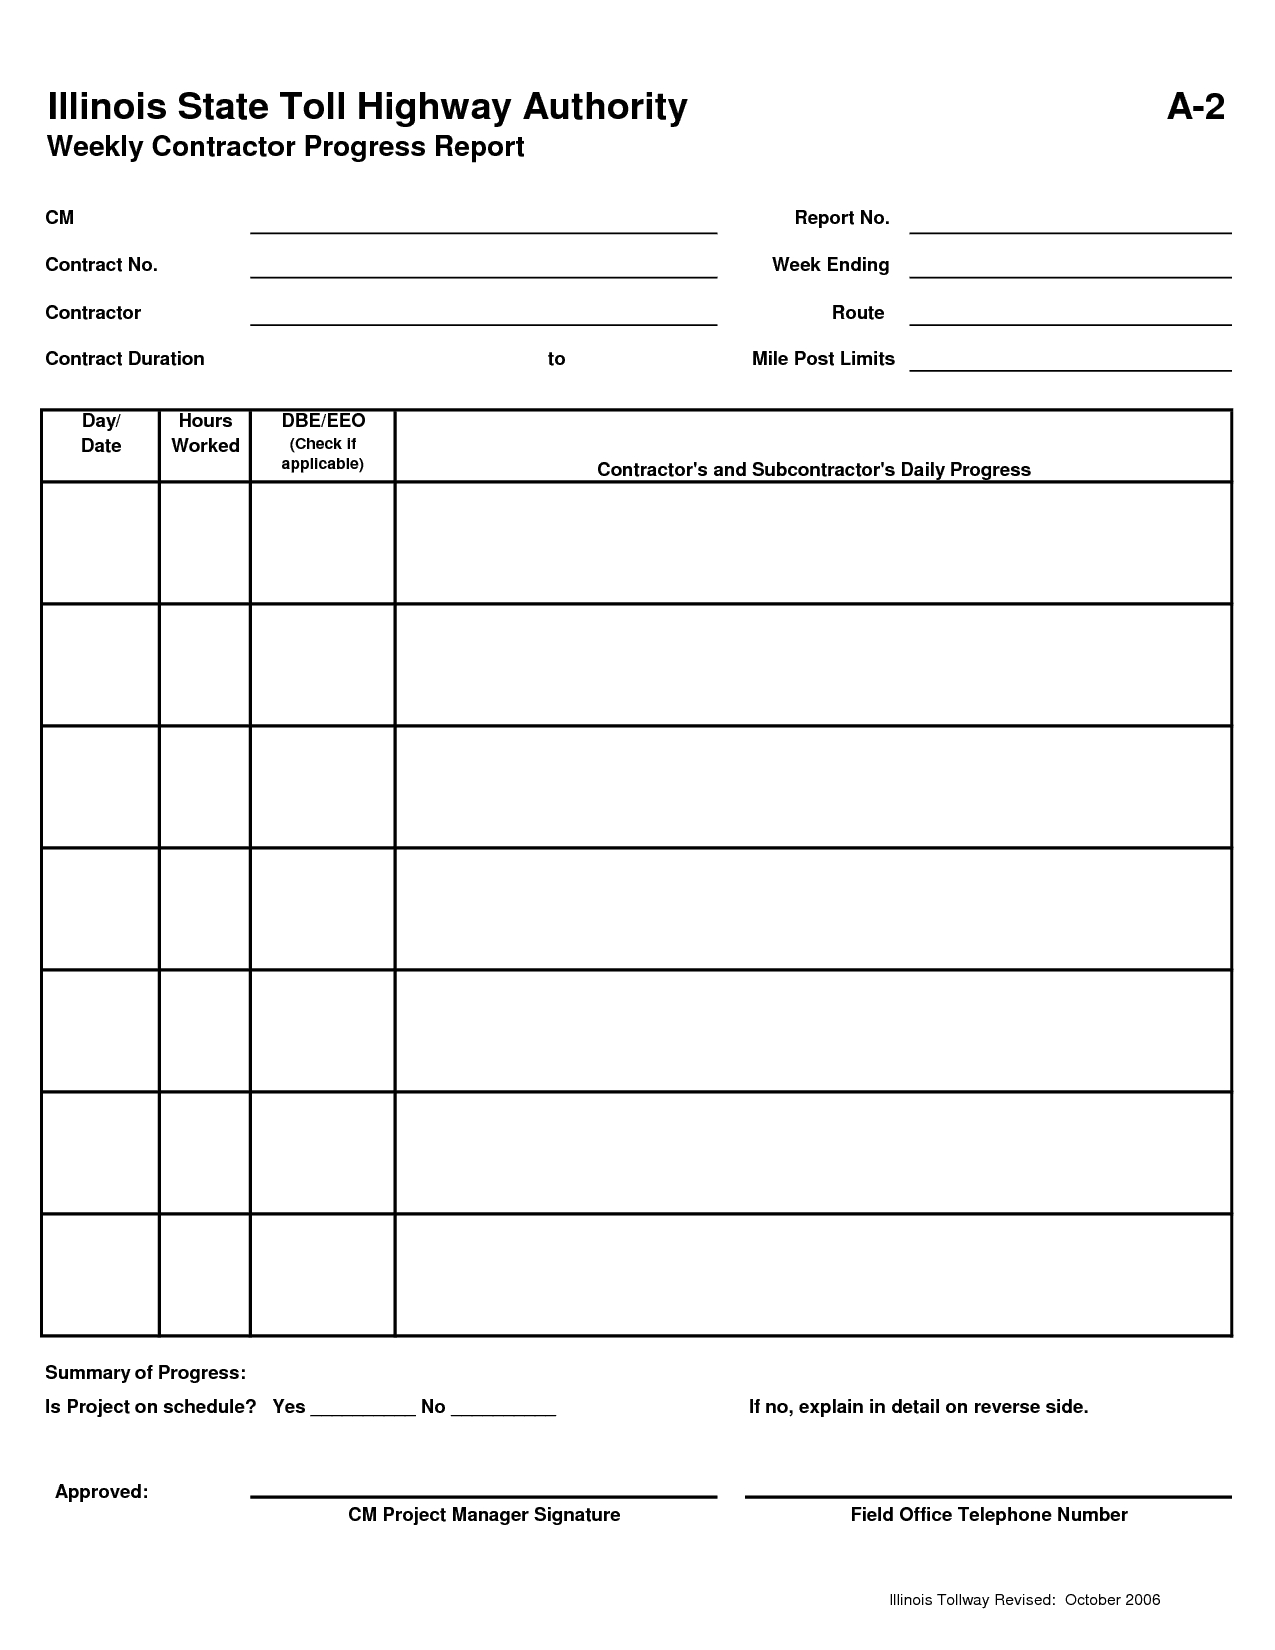 Bookkeeping Eadsheet For Small Business And Gas Station Pertaining To Daily Report Sheet Template